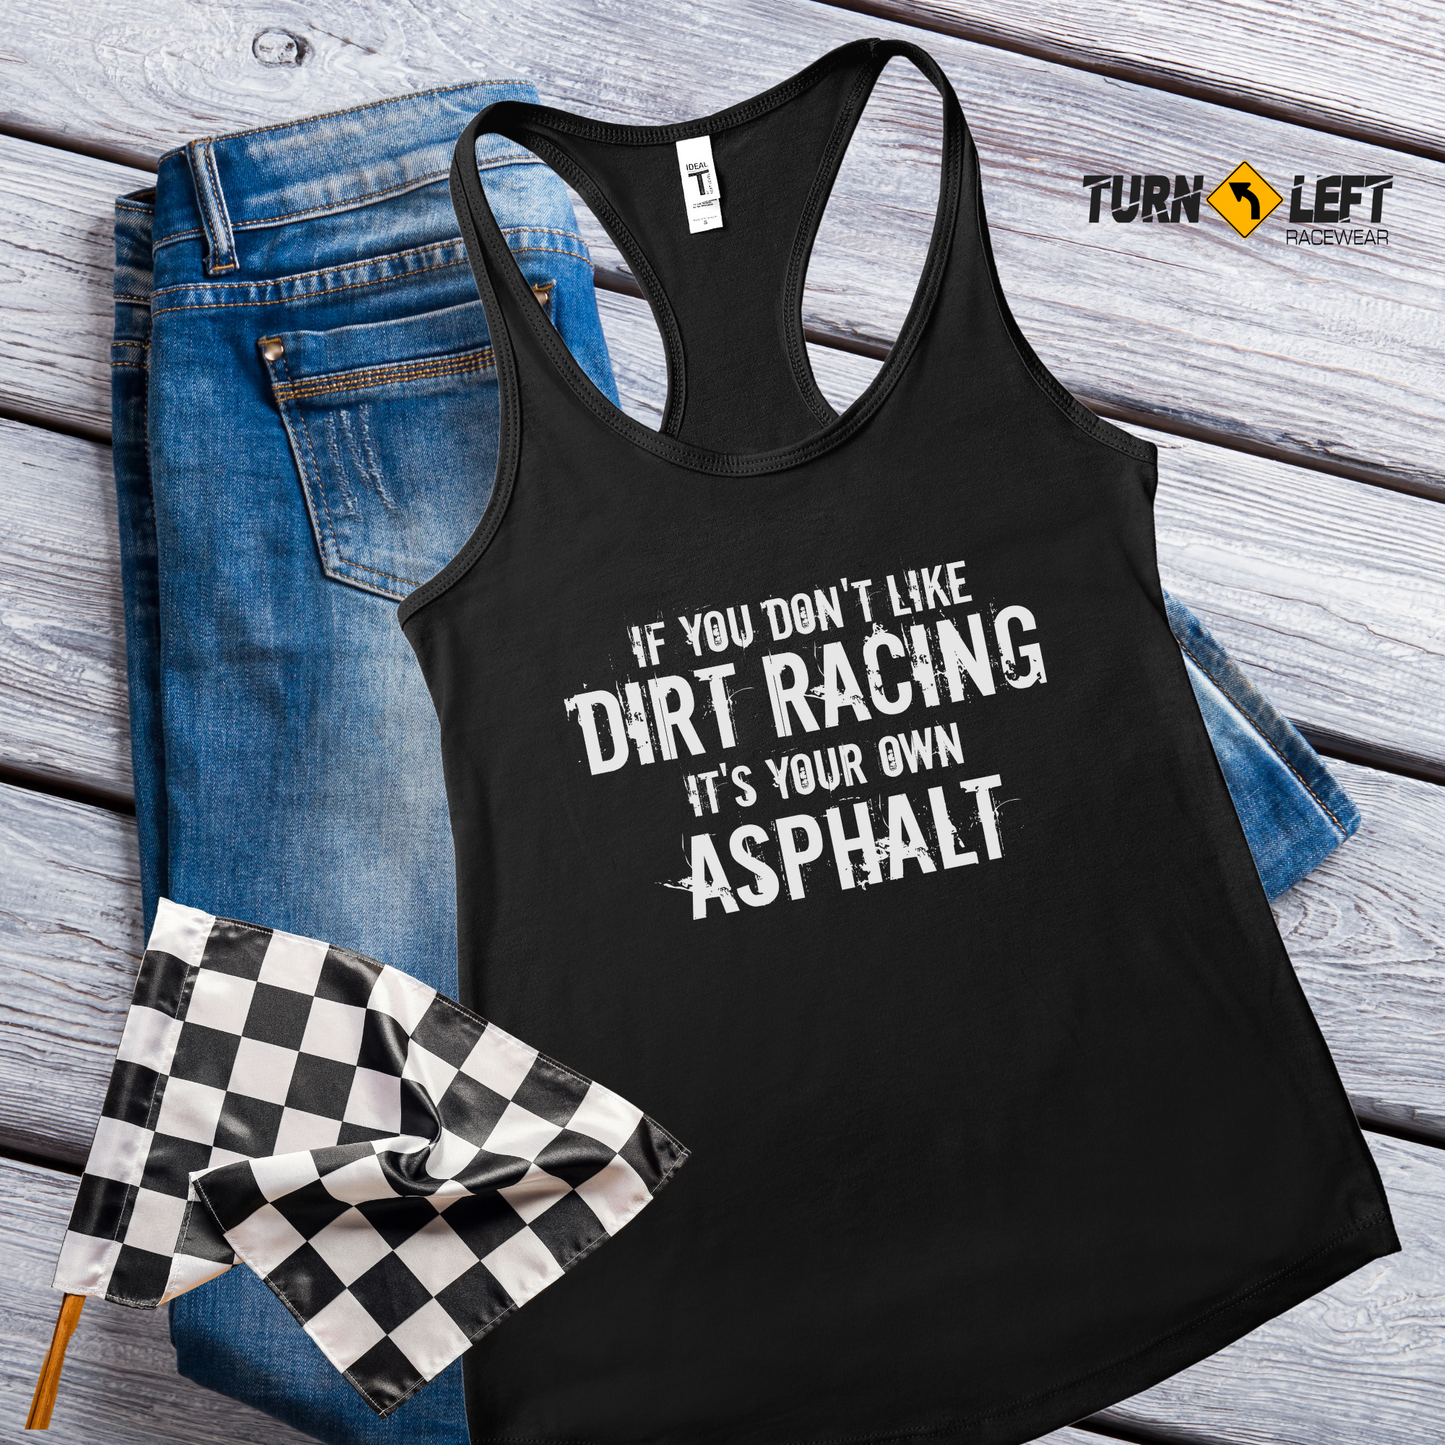 Women's dirt racing tank tops. Racing quote shirts for women. If you don't like dirt track racing it's your own asphalt shirts, Racing gifts for women.